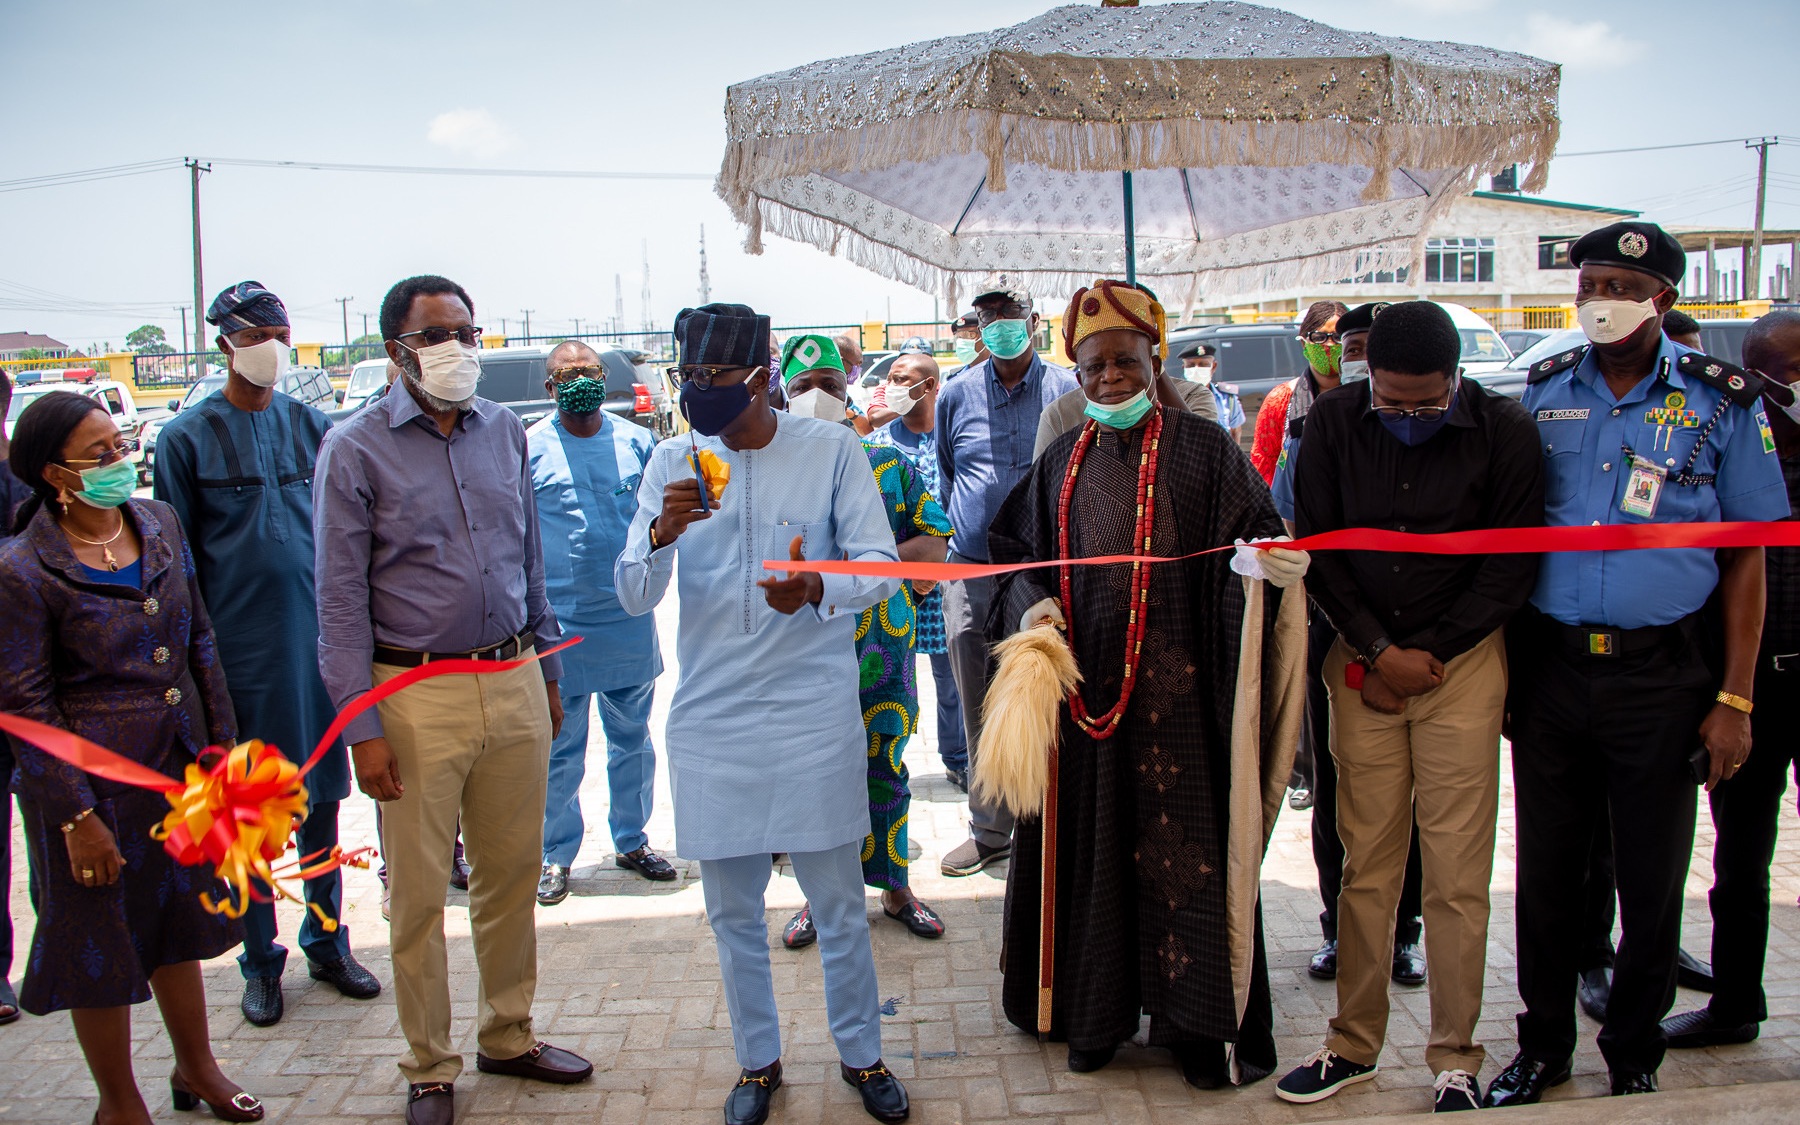 Lagos State Governor, Mr. Babajide Sanwo-Olu (3rd left), cutting the tape to commission the Area ‘J’ Police Command, Elemoro, Ibeju-Lekki, on Thursday, April 23, 2020. With him are: Special Adviser to the Governor on Works & Infrastructure, Engr. Aramide Adeyoye (left); Attorney General/Commissioner for Justice, Mr. Moyo Onigbanjo, SAN (2nd left); Oniwereku of Iwereku Kingdom, Oba Tajudeen Afolabi-Adebanjo Elemoro (3rd right); Head of Service, Mr. Hakeem Muri-Okunola (2nd right) and the State Commissioner of Police, Mr. Hakeem Odumosu (right).